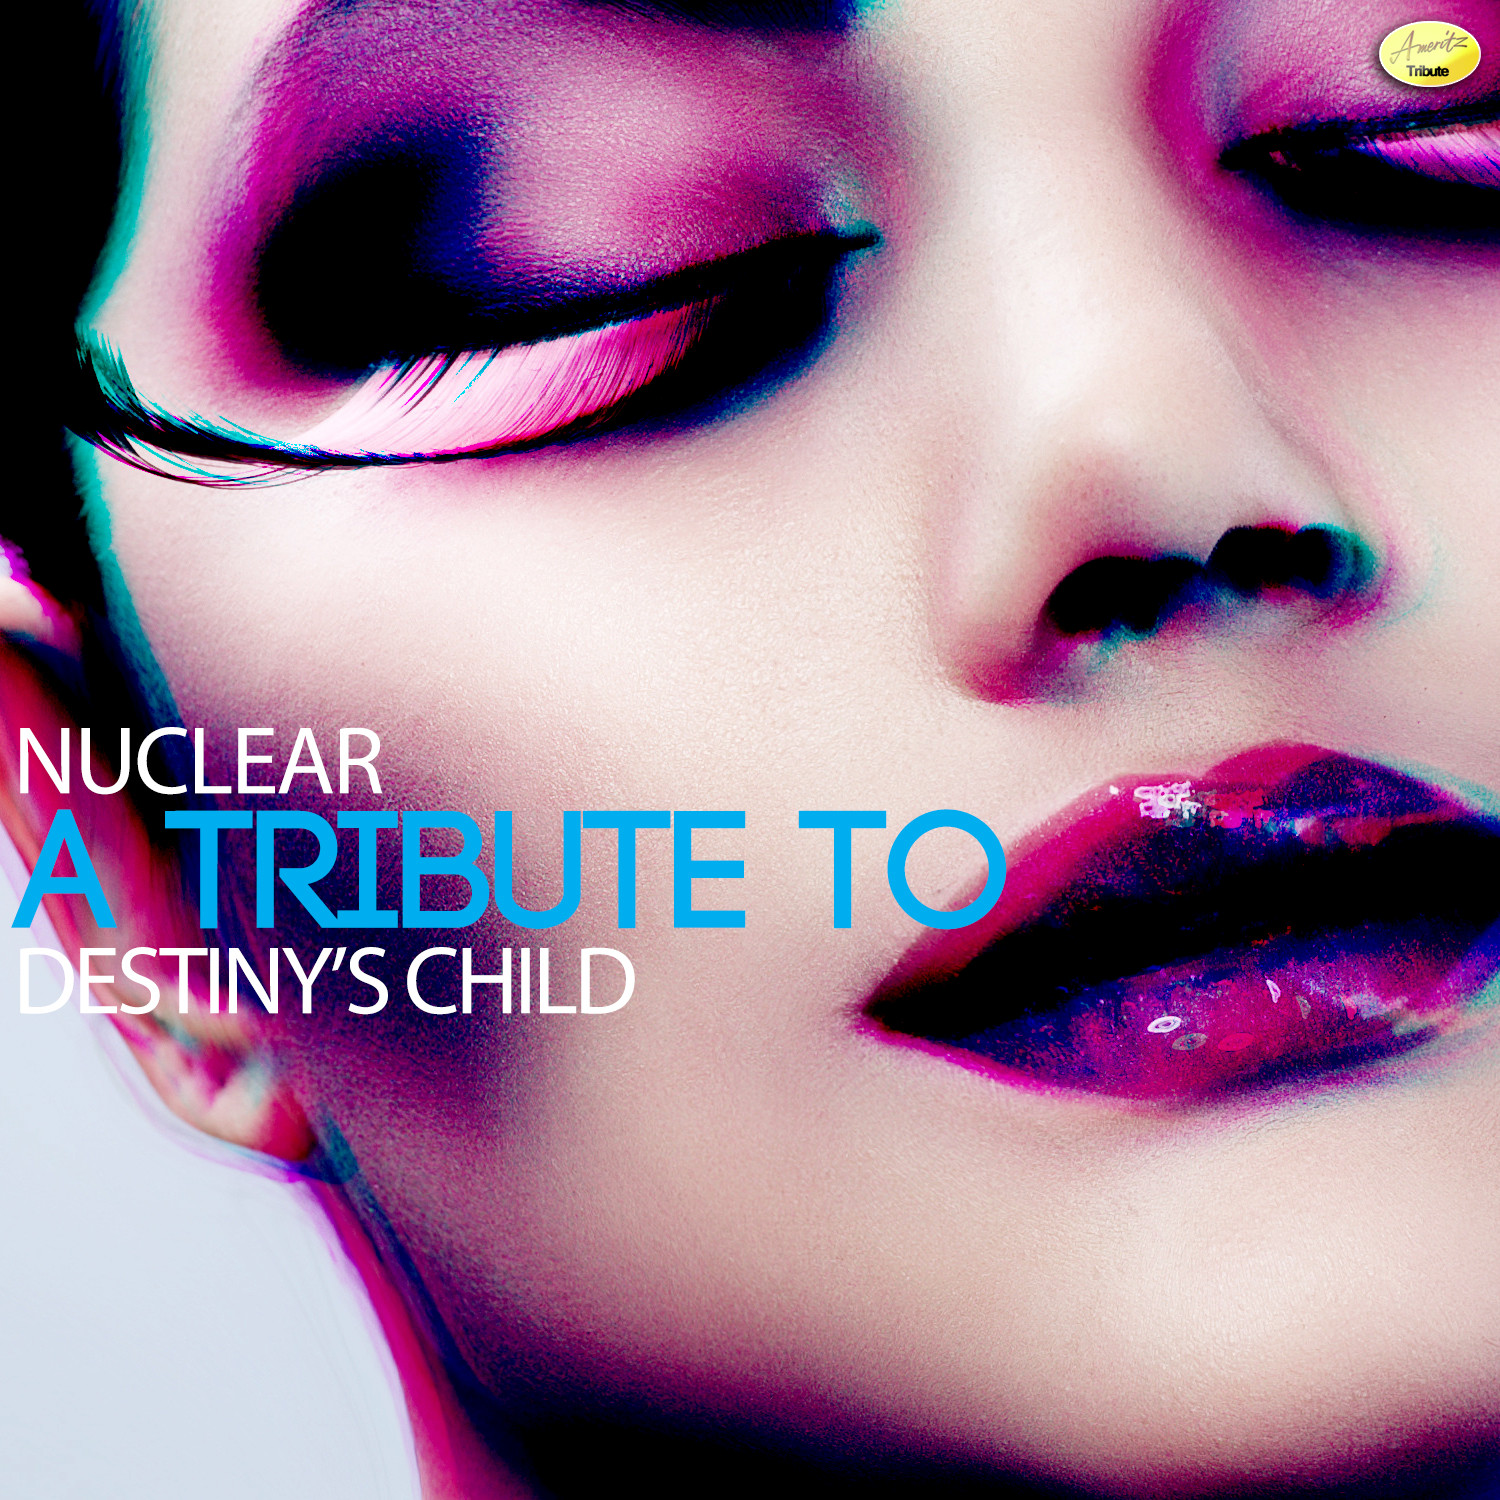 Nuclear - A Tribute to Destiny's Child